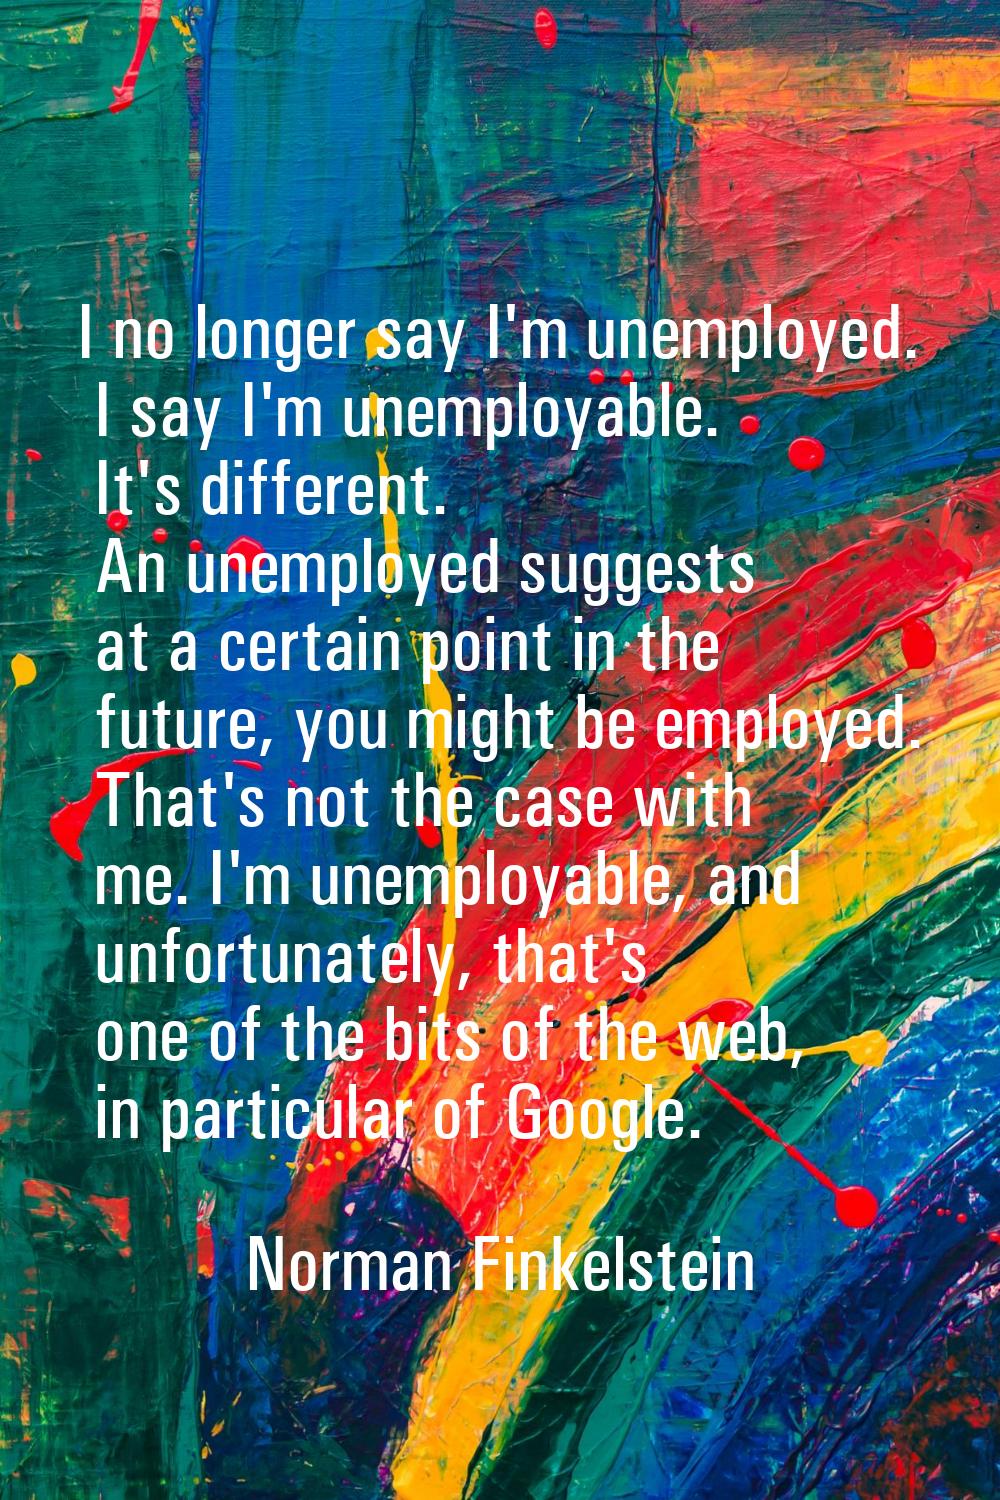 I no longer say I'm unemployed. I say I'm unemployable. It's different. An unemployed suggests at a